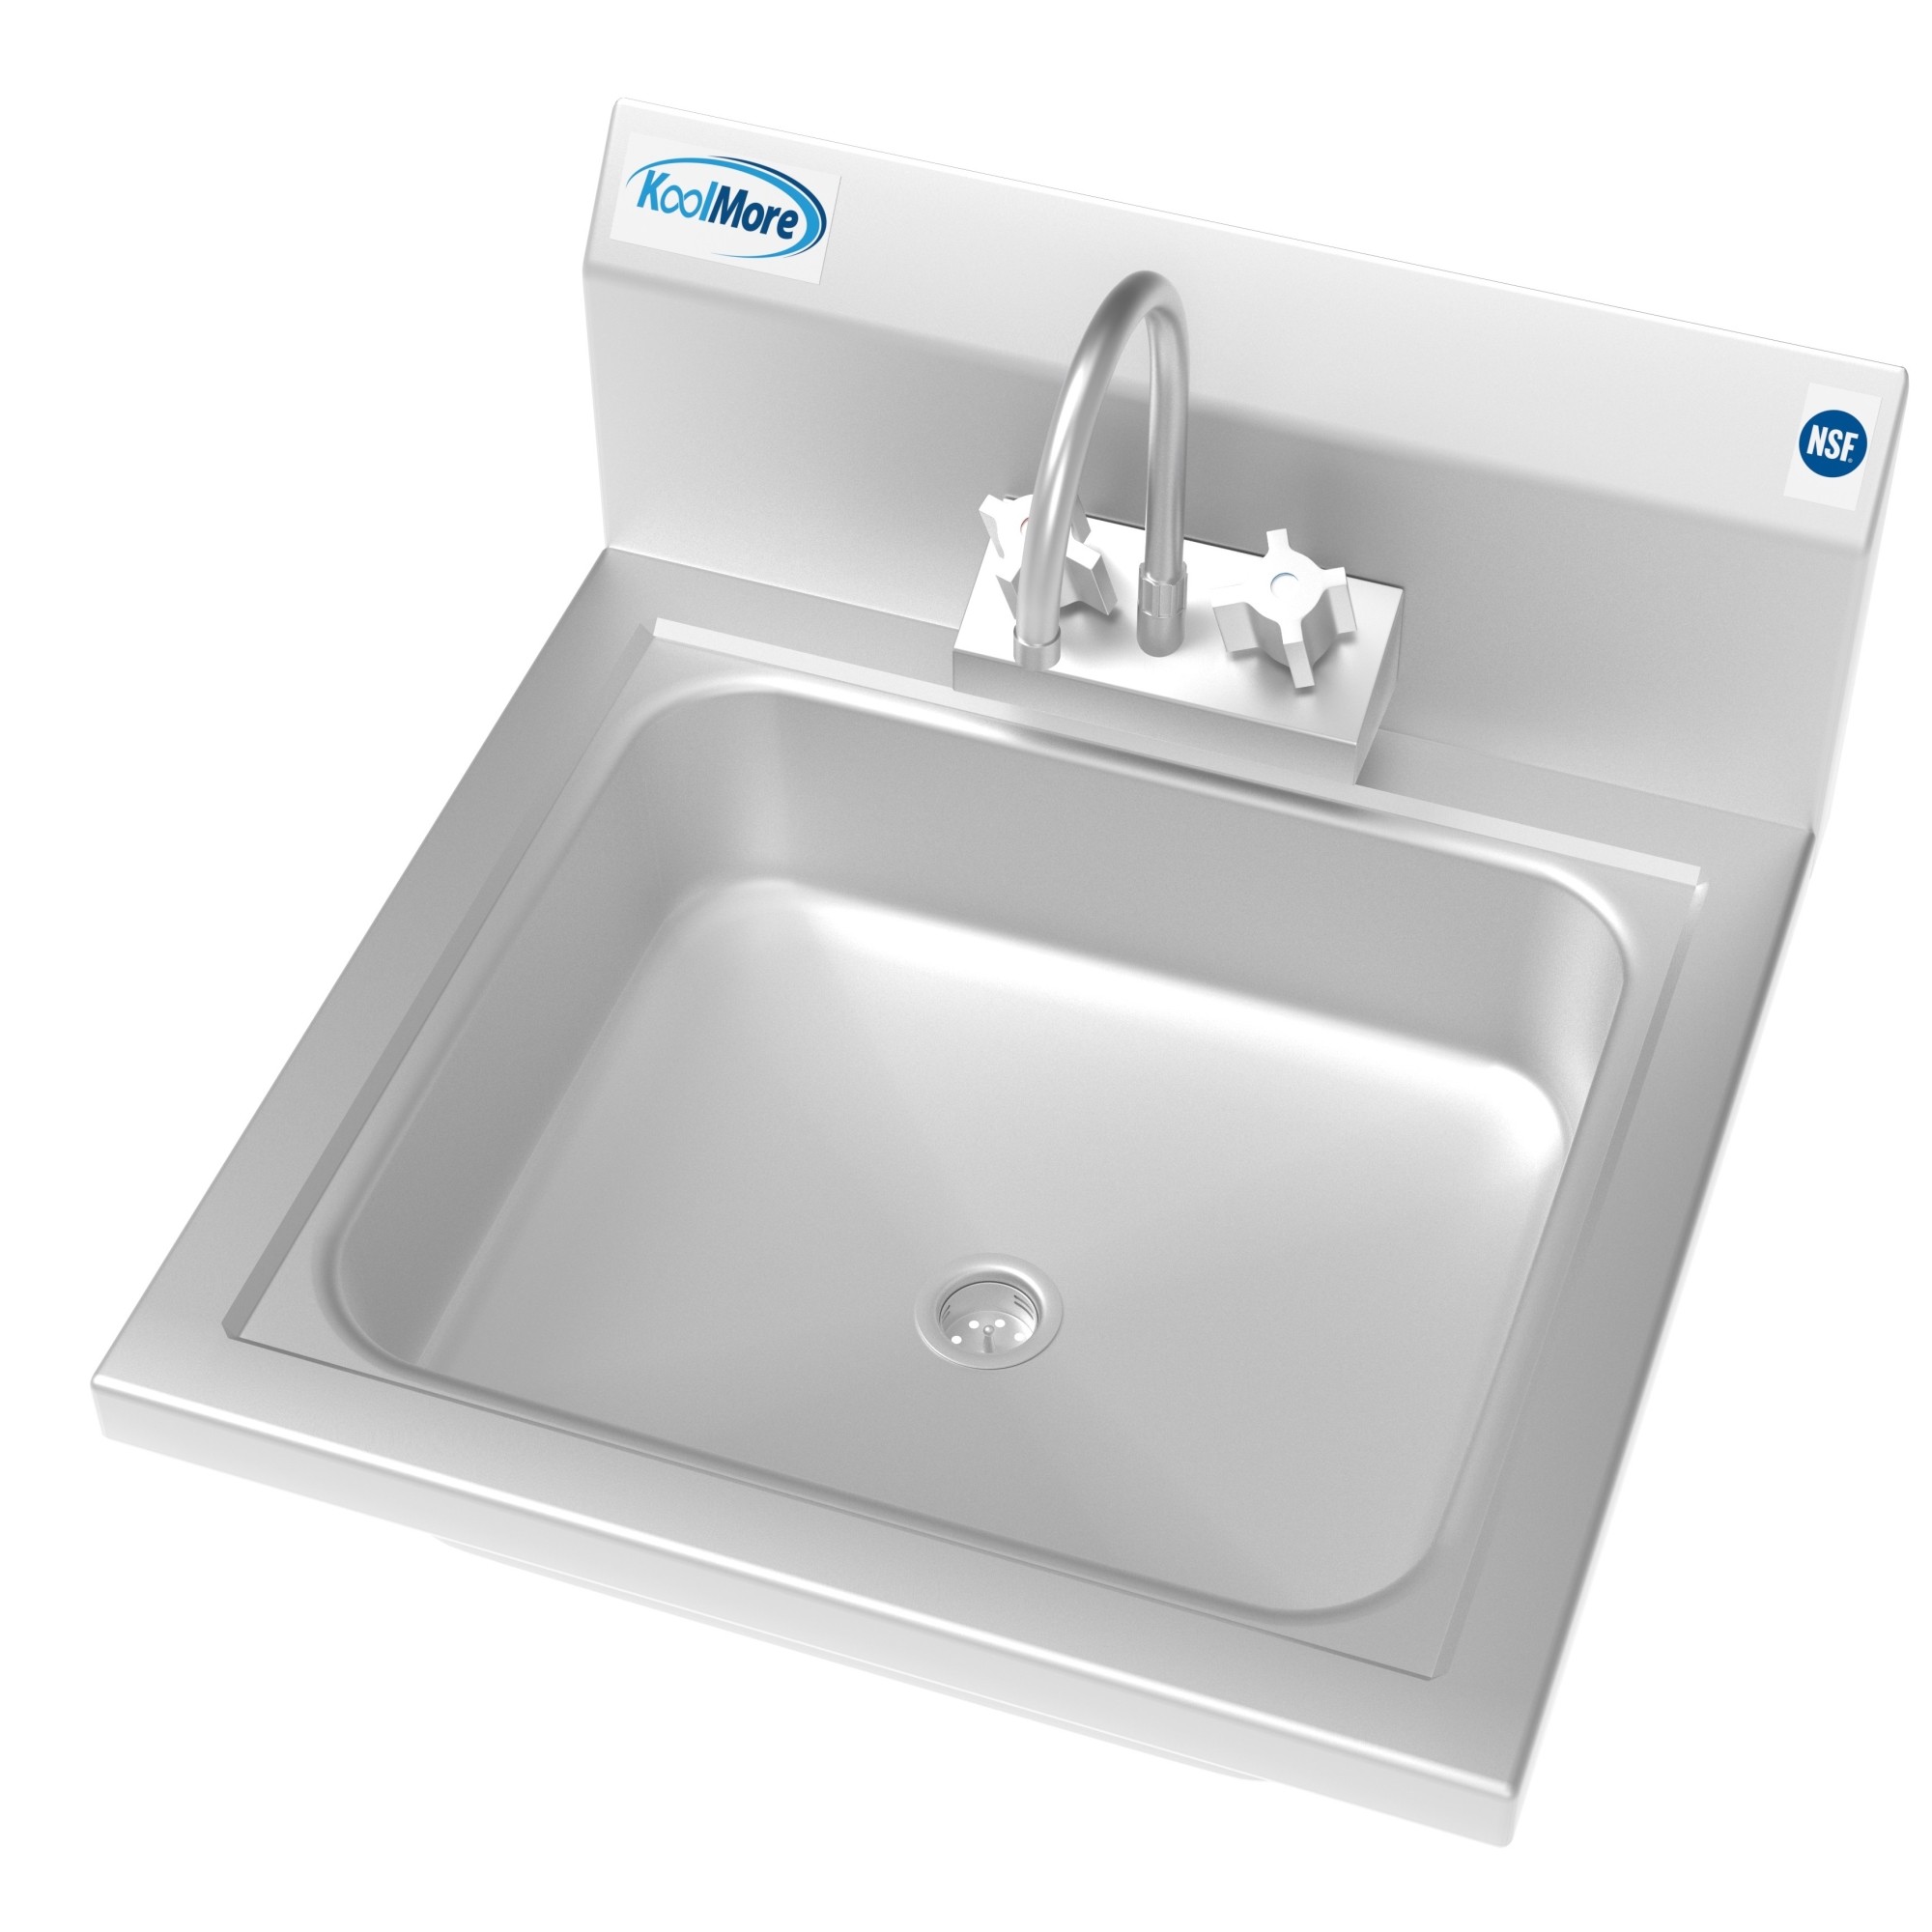 Koolmore SH17-4GNF Stainless Steel Hand Sink with Gooseneck Faucet 17"W x 15"D x 13"H